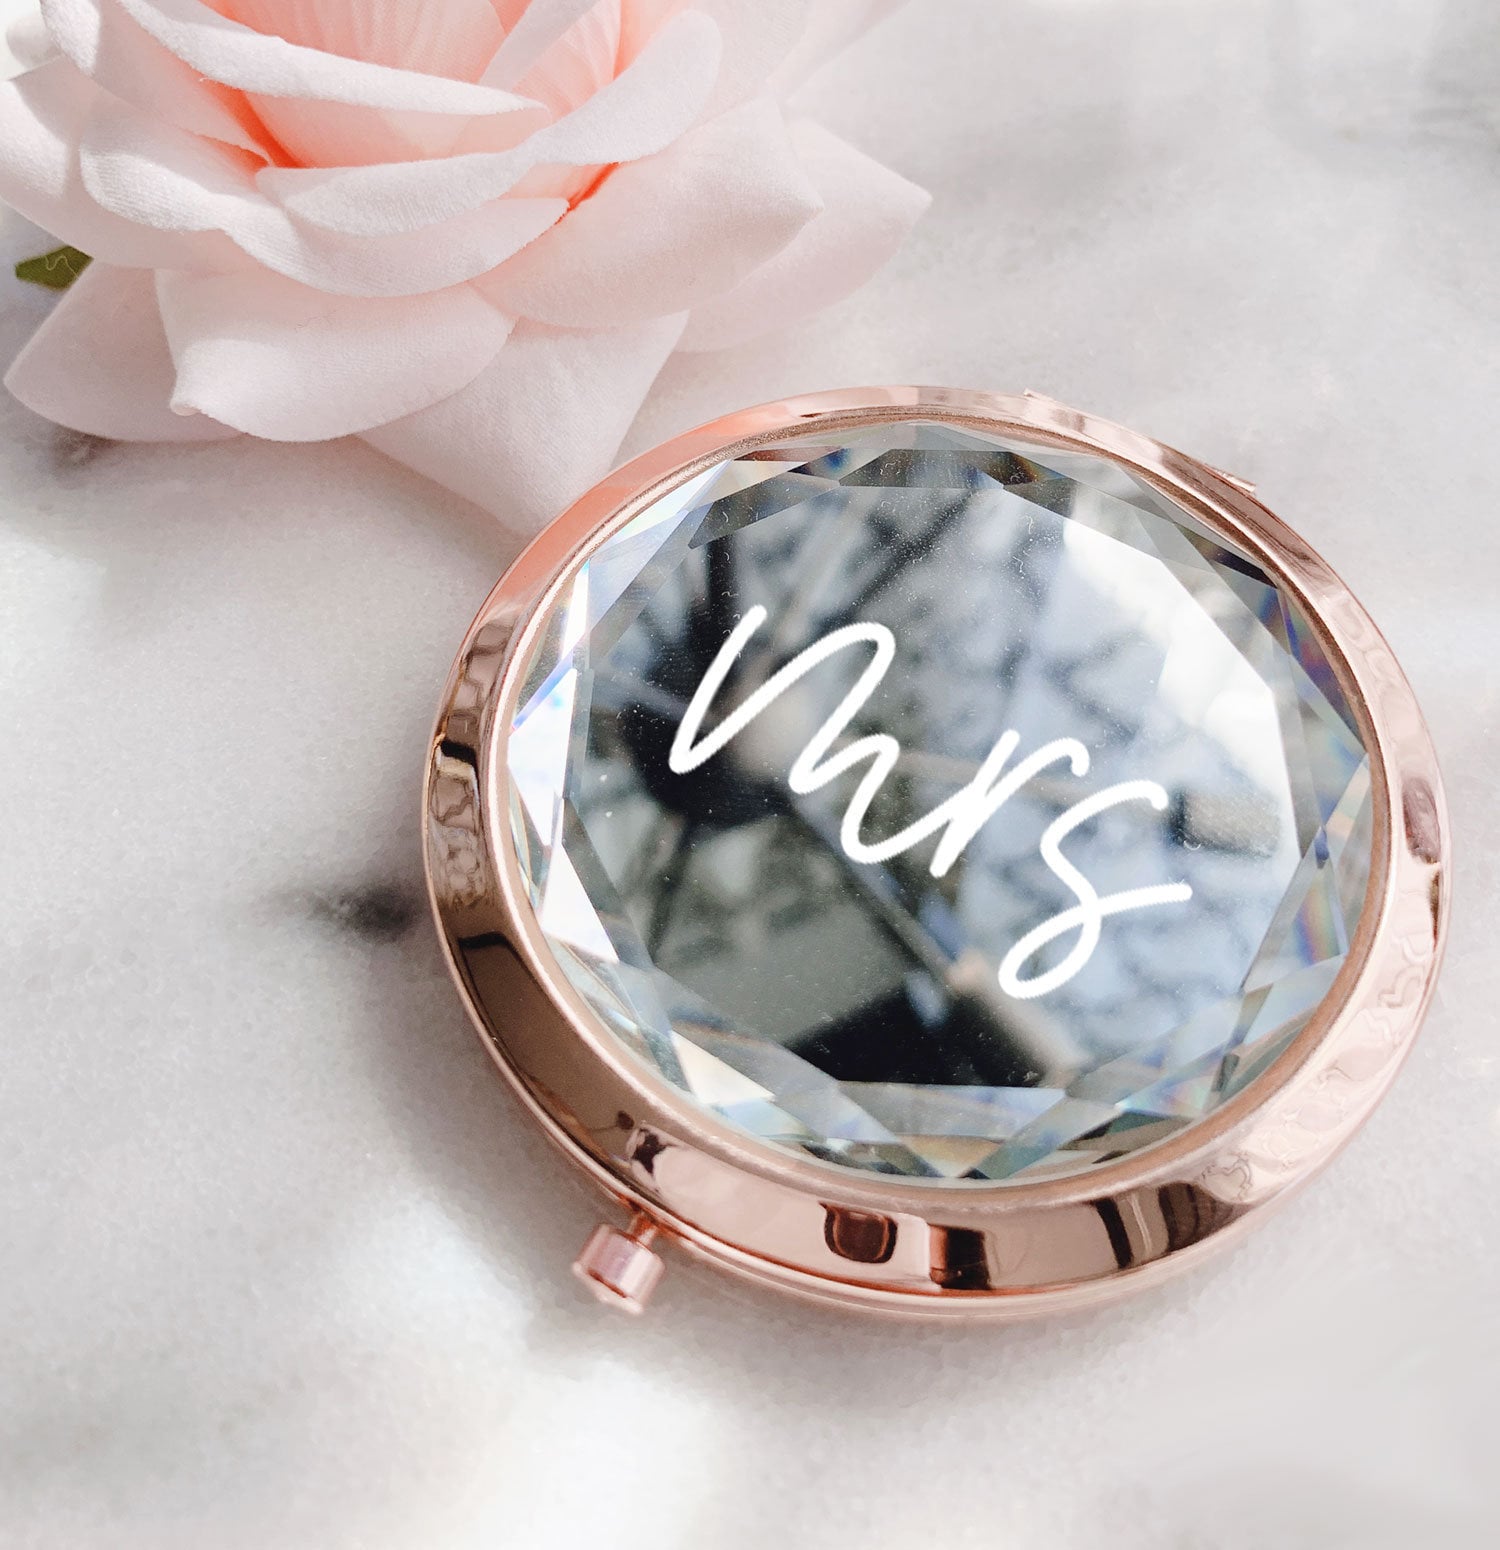 Personalized Custom Gift Bridal Party Gift Mother of the Groom Wedding Gift Compact Mirror Bride Compact Mirror Mother Gift C37